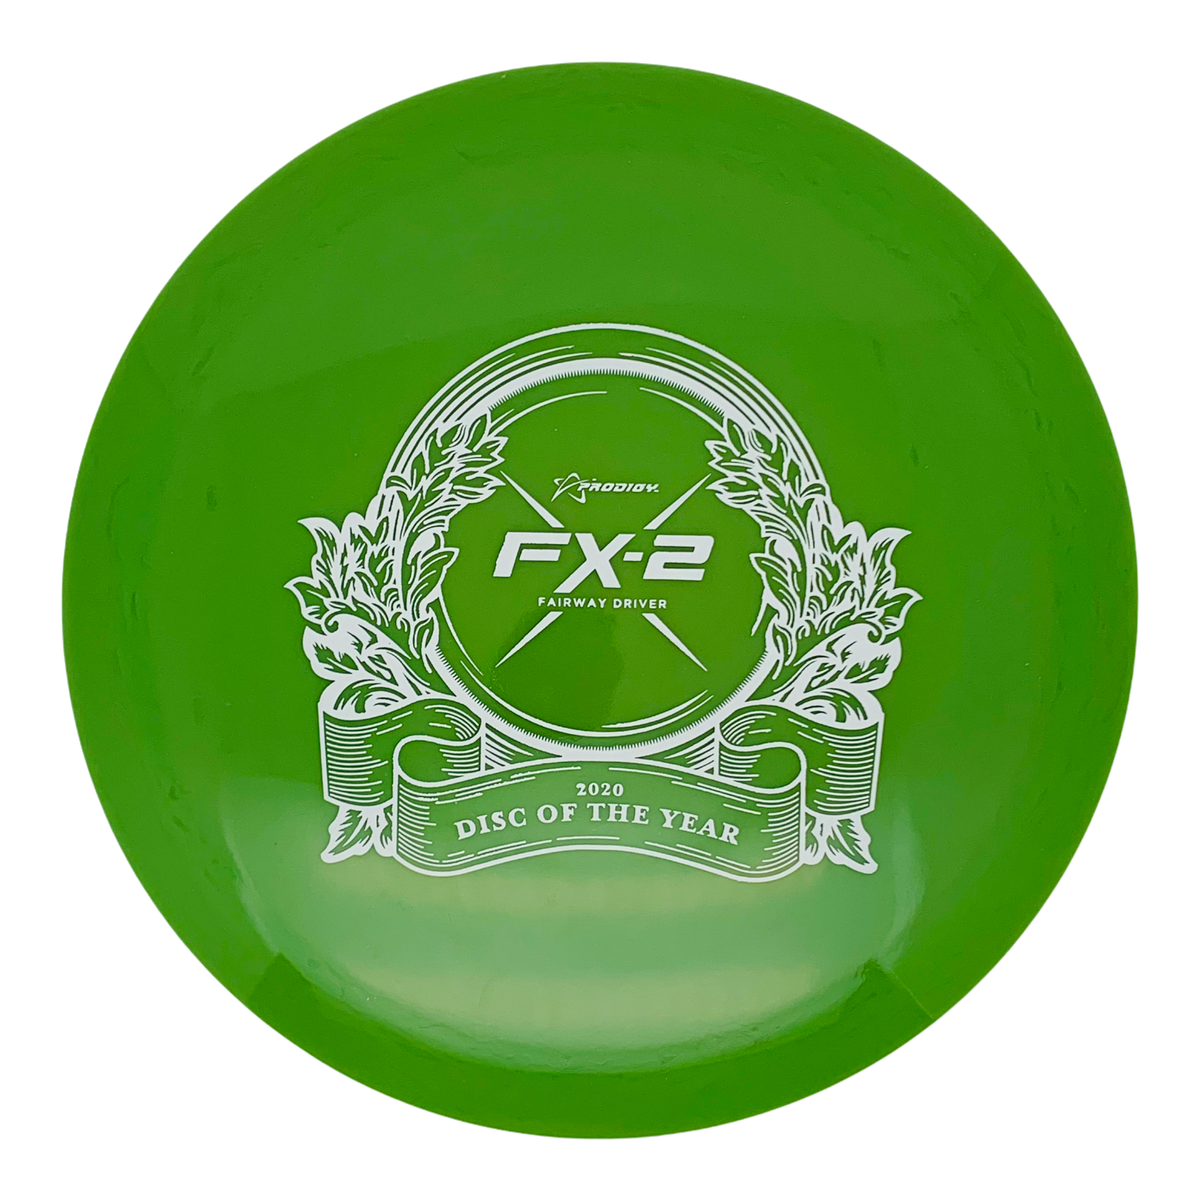 Prodigy 400G FX-2 - 2020 Disc of the Year